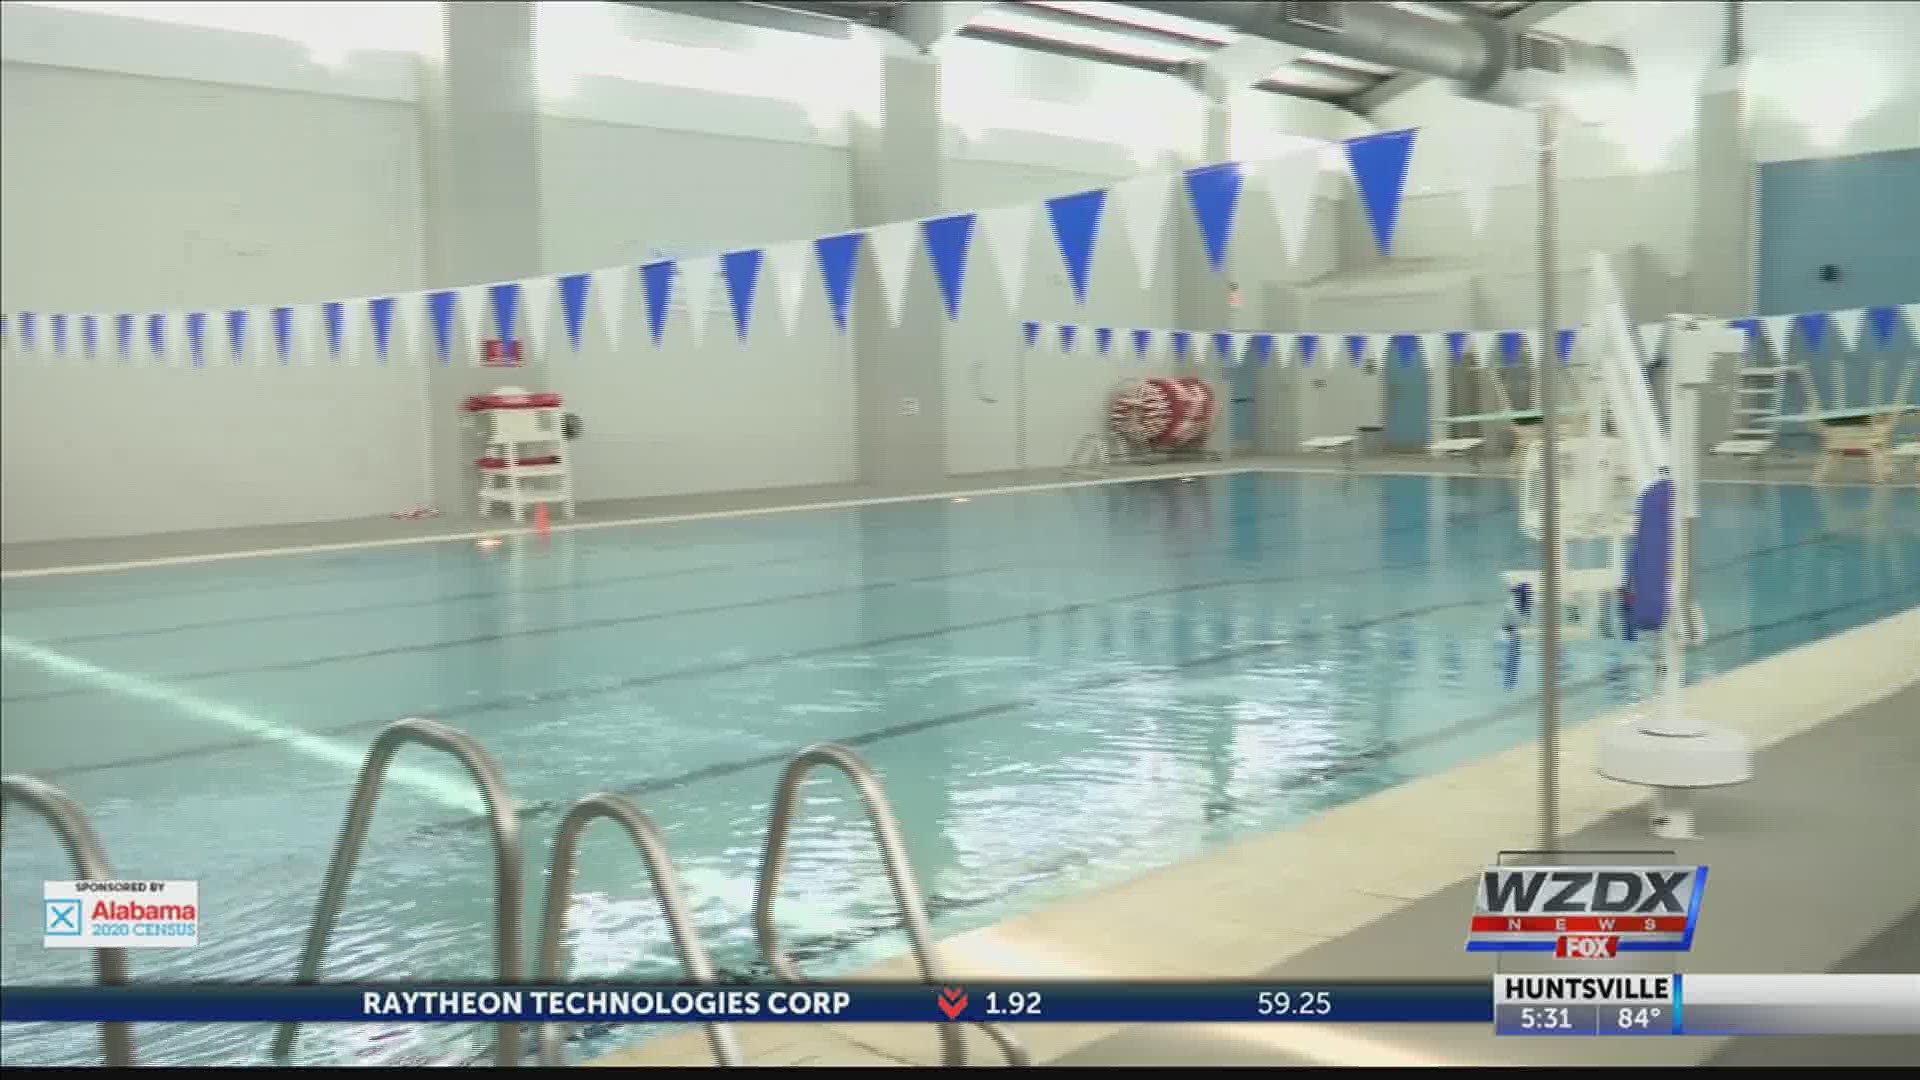 Leaders say they hope these funds will provide better access to kids for swim lessons and water safety.